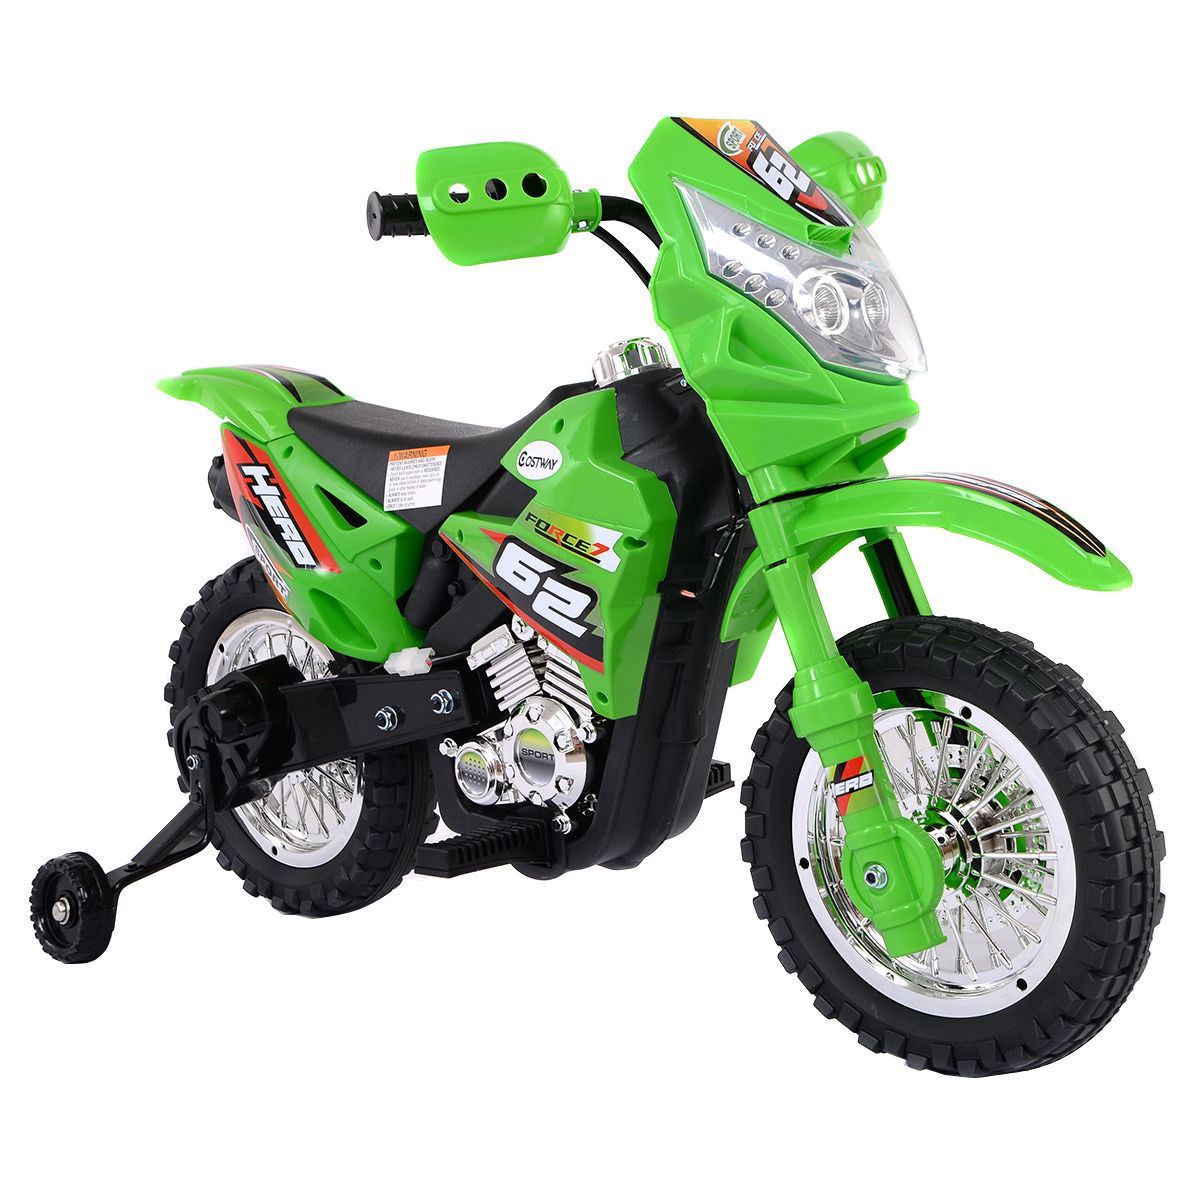 Picture of Online Gym Shop CB16969 Kids Baby Ride on Motorcycle with Training Wheel 6V Battery Powered Electric